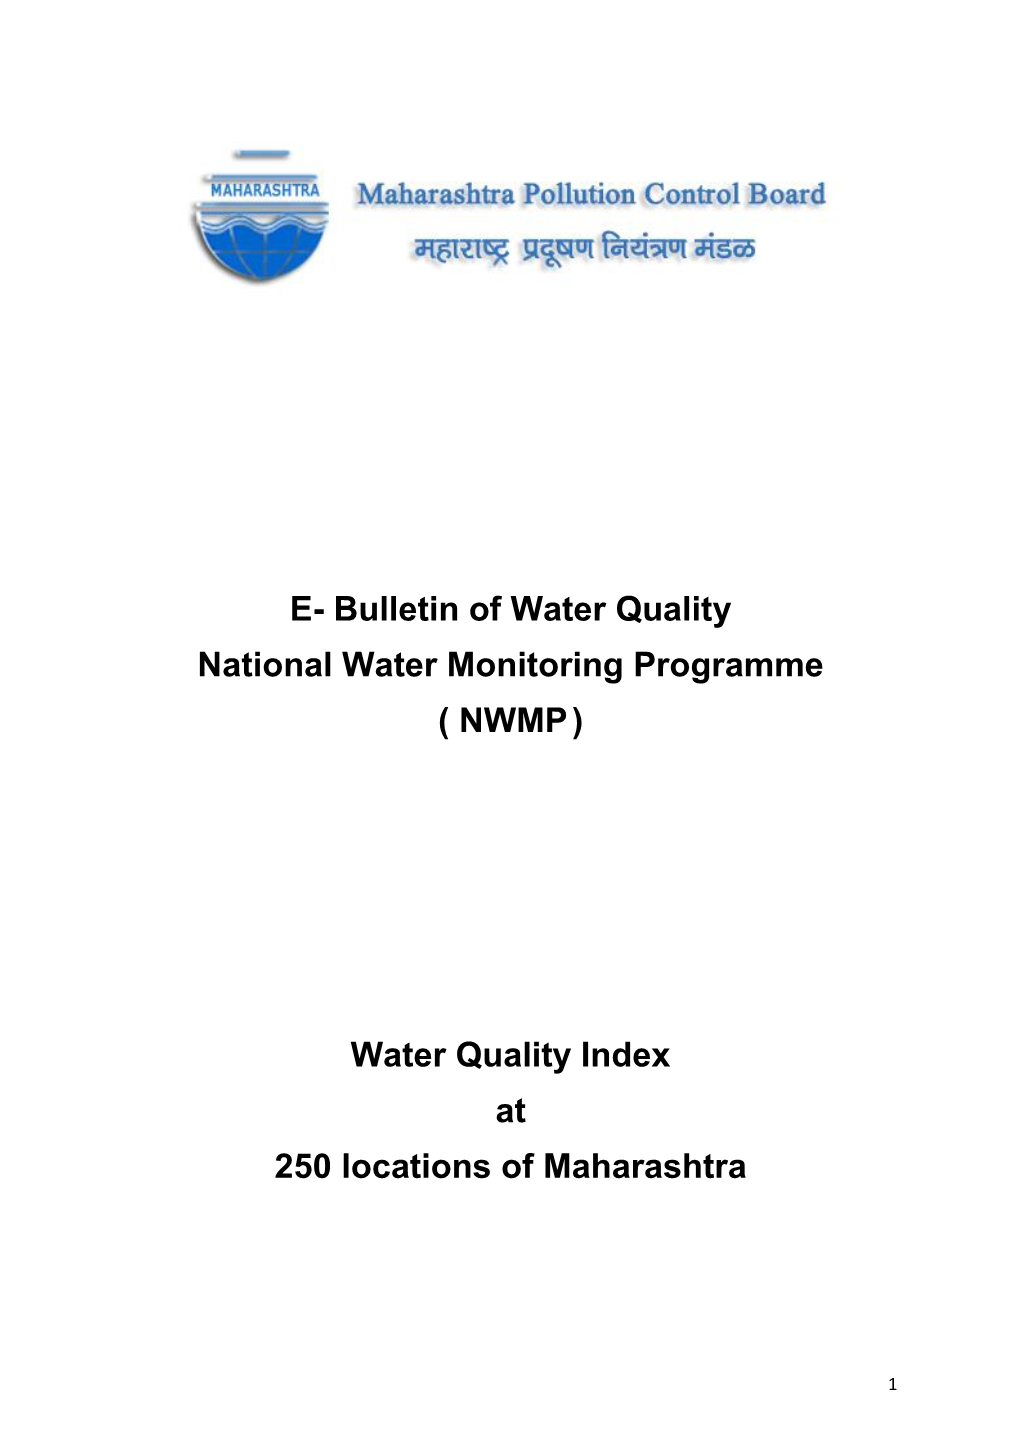 E- Bulletin of Water Quality National Water Monitoring Programme